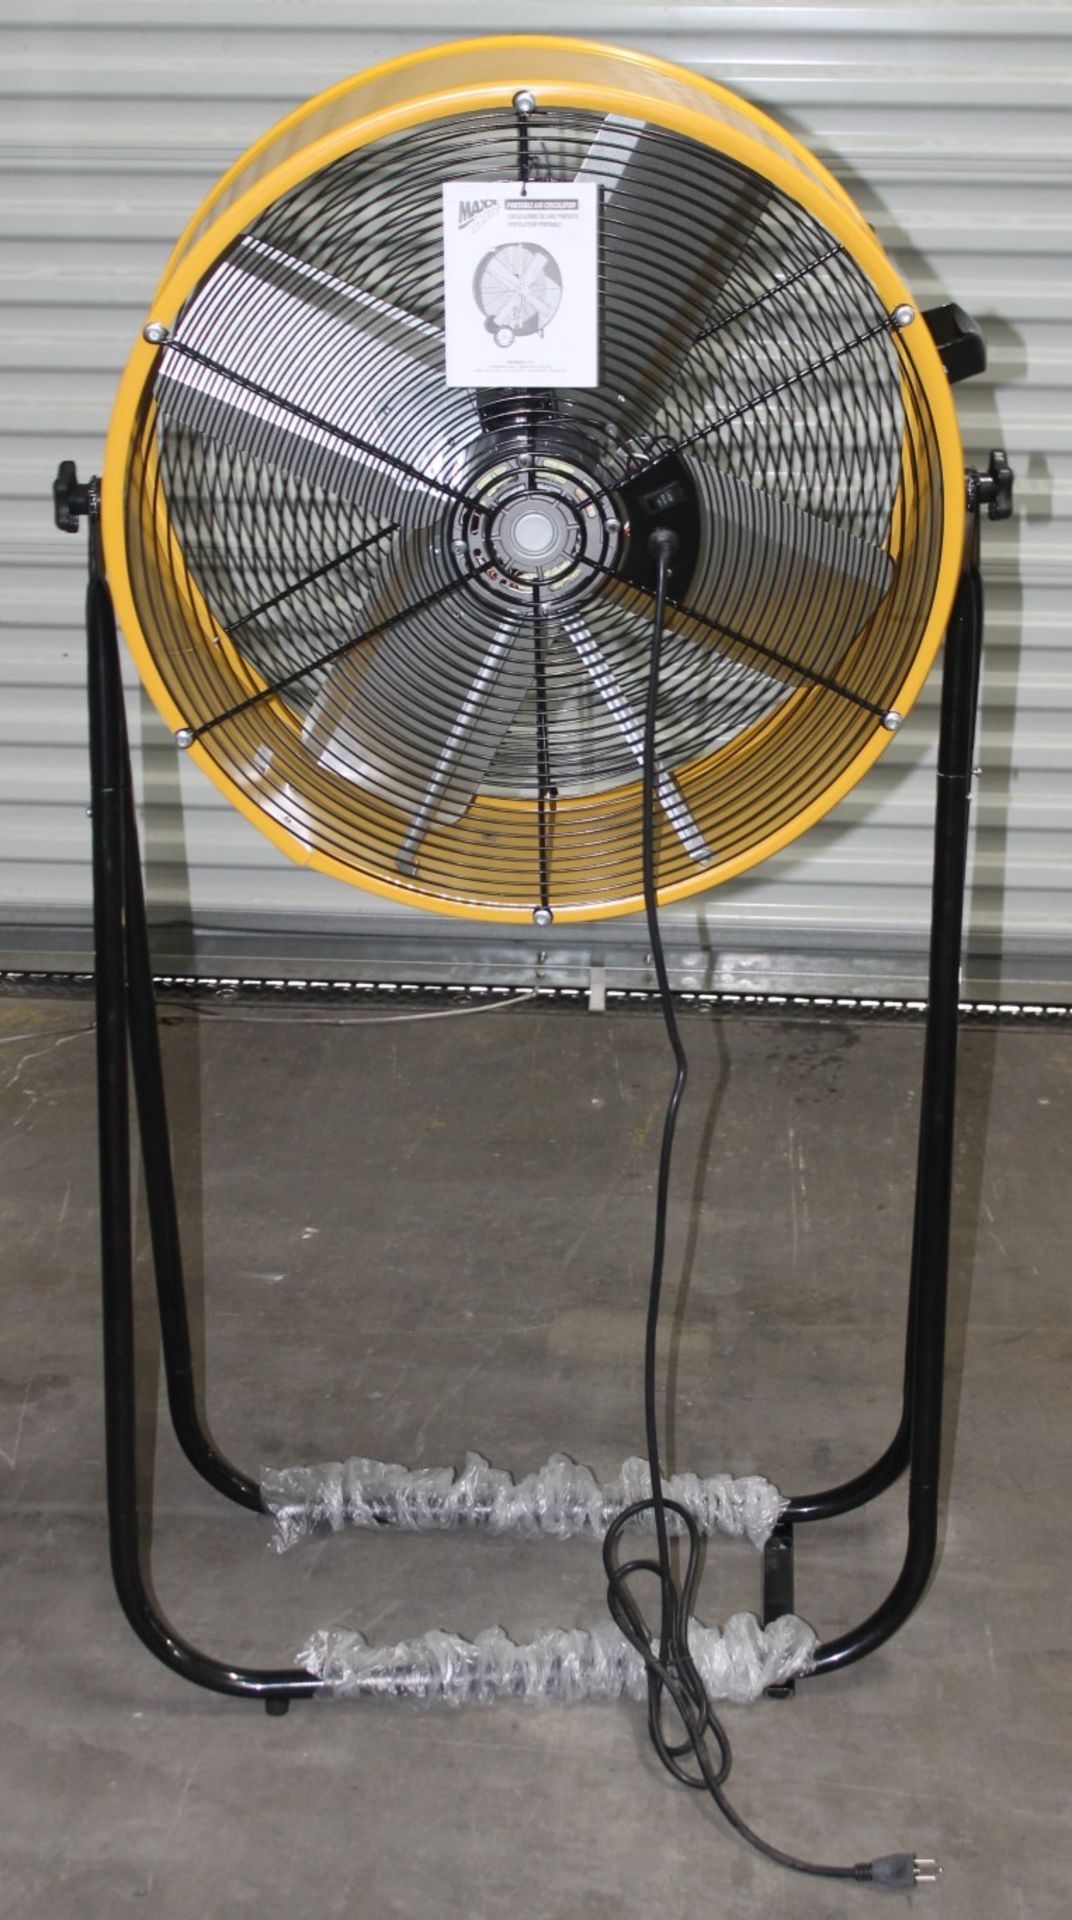 MAX AIR 24" 2 IN 1 TILT FAN,  MODEL: BF24TF2N1, CONVERTS FROM A ROLL AROUND FLOOR FAN TO A 52" STAND - Image 2 of 3